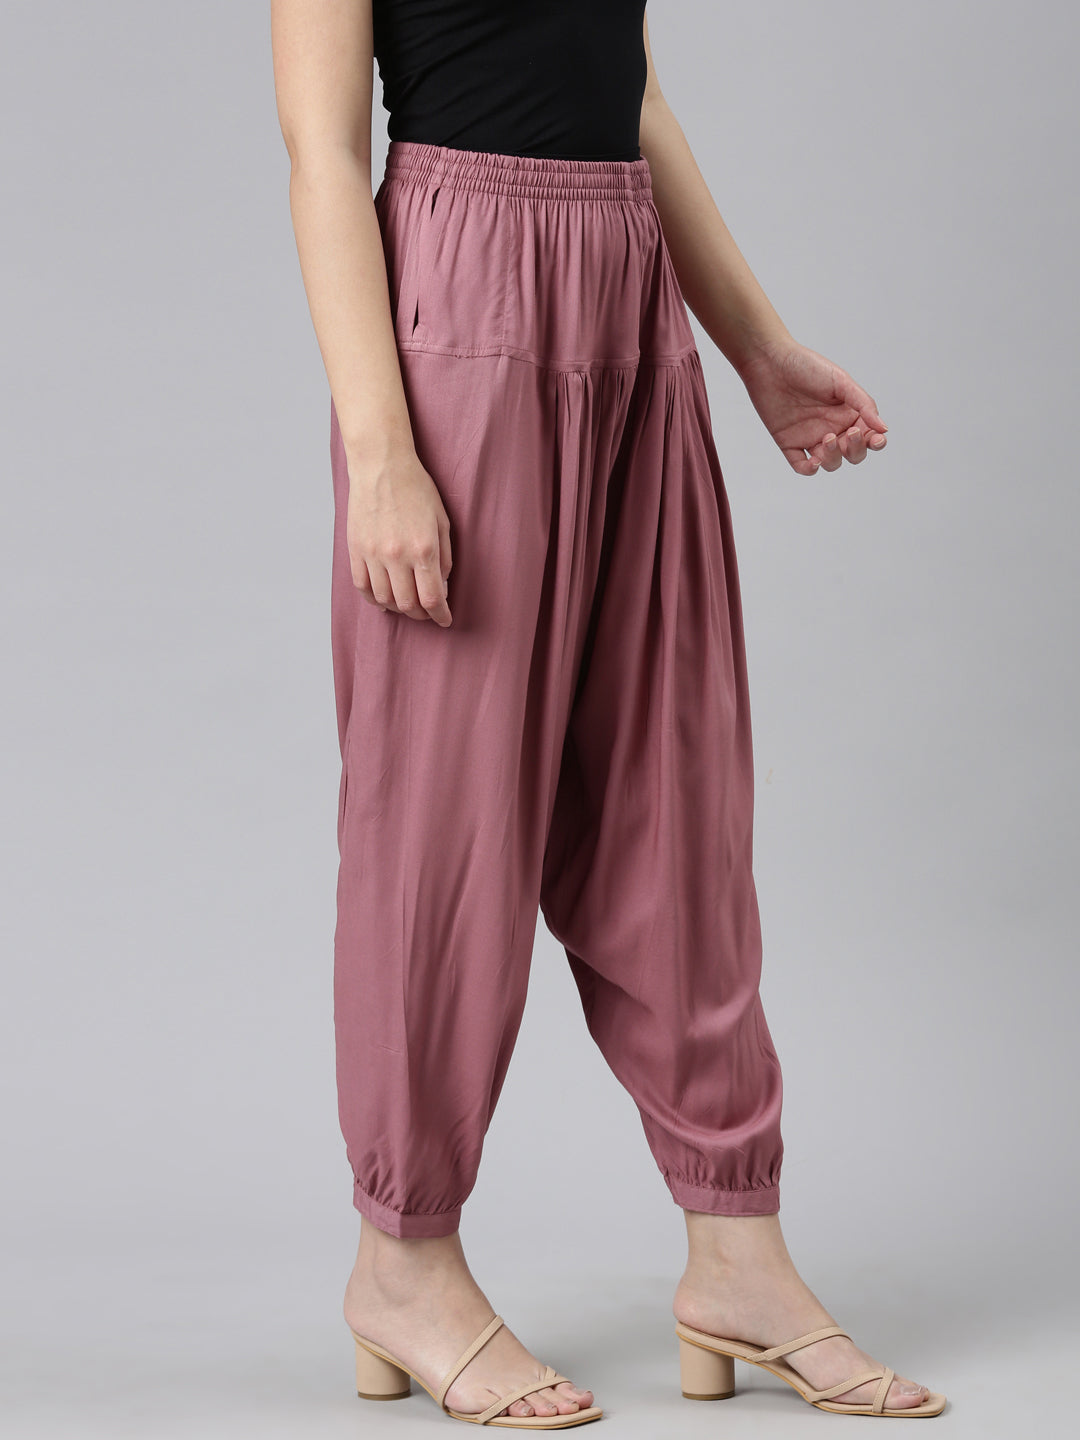 Pinstripe Cotton Low Cut Women's Harem Pants With Hill Tribe Trim Brow